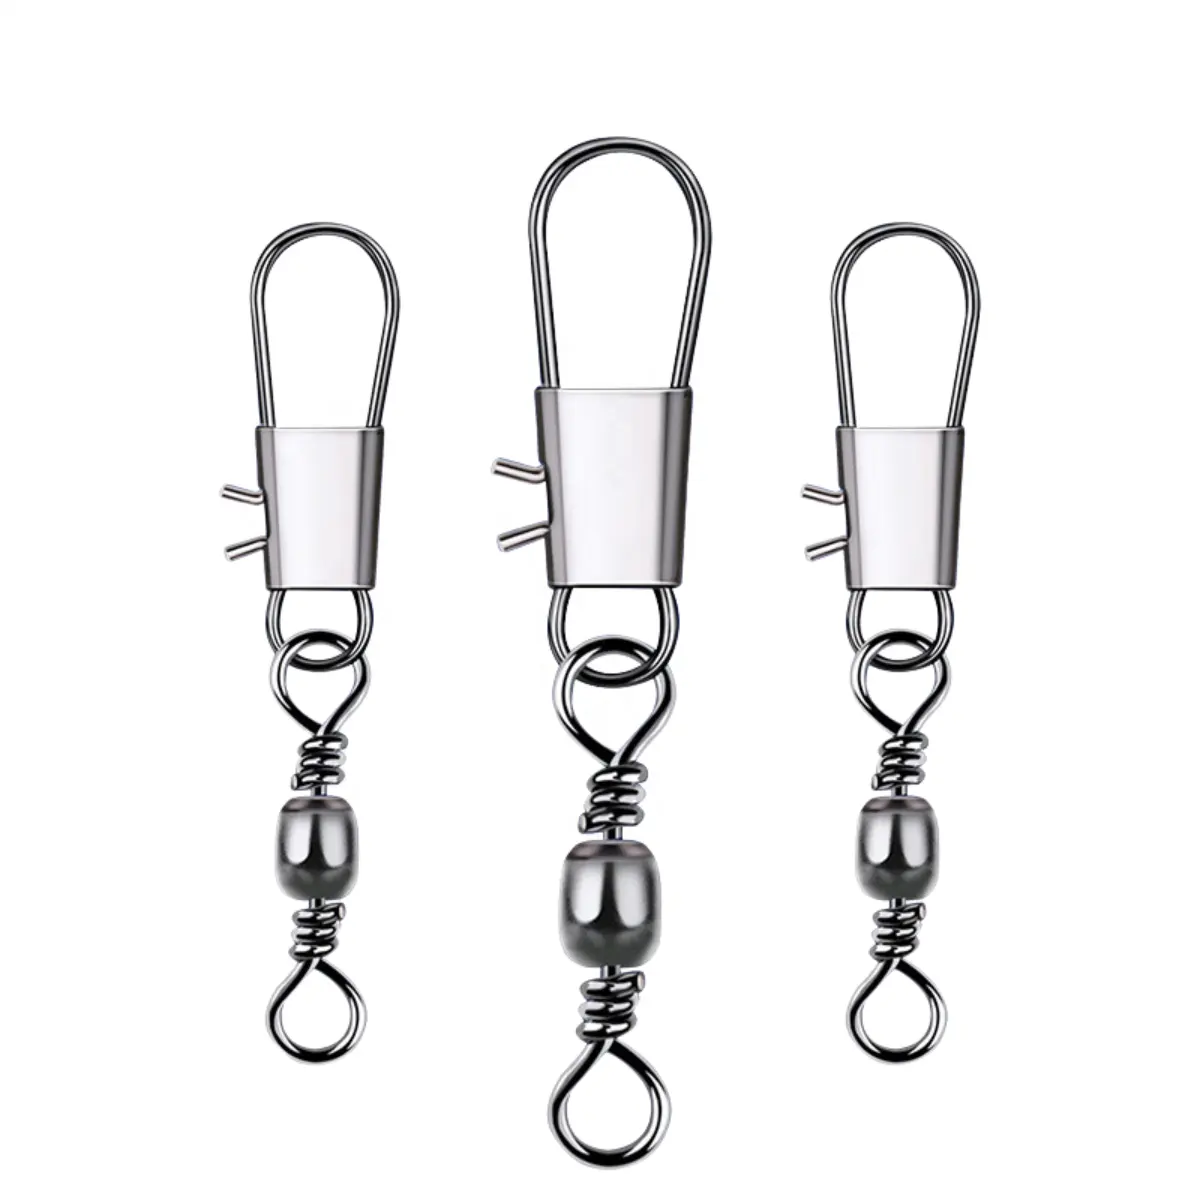 Good Selling Fishing Accessories All Stainless Steel Swivels American Rotary Connector Fishing Crane Rolling Swivel